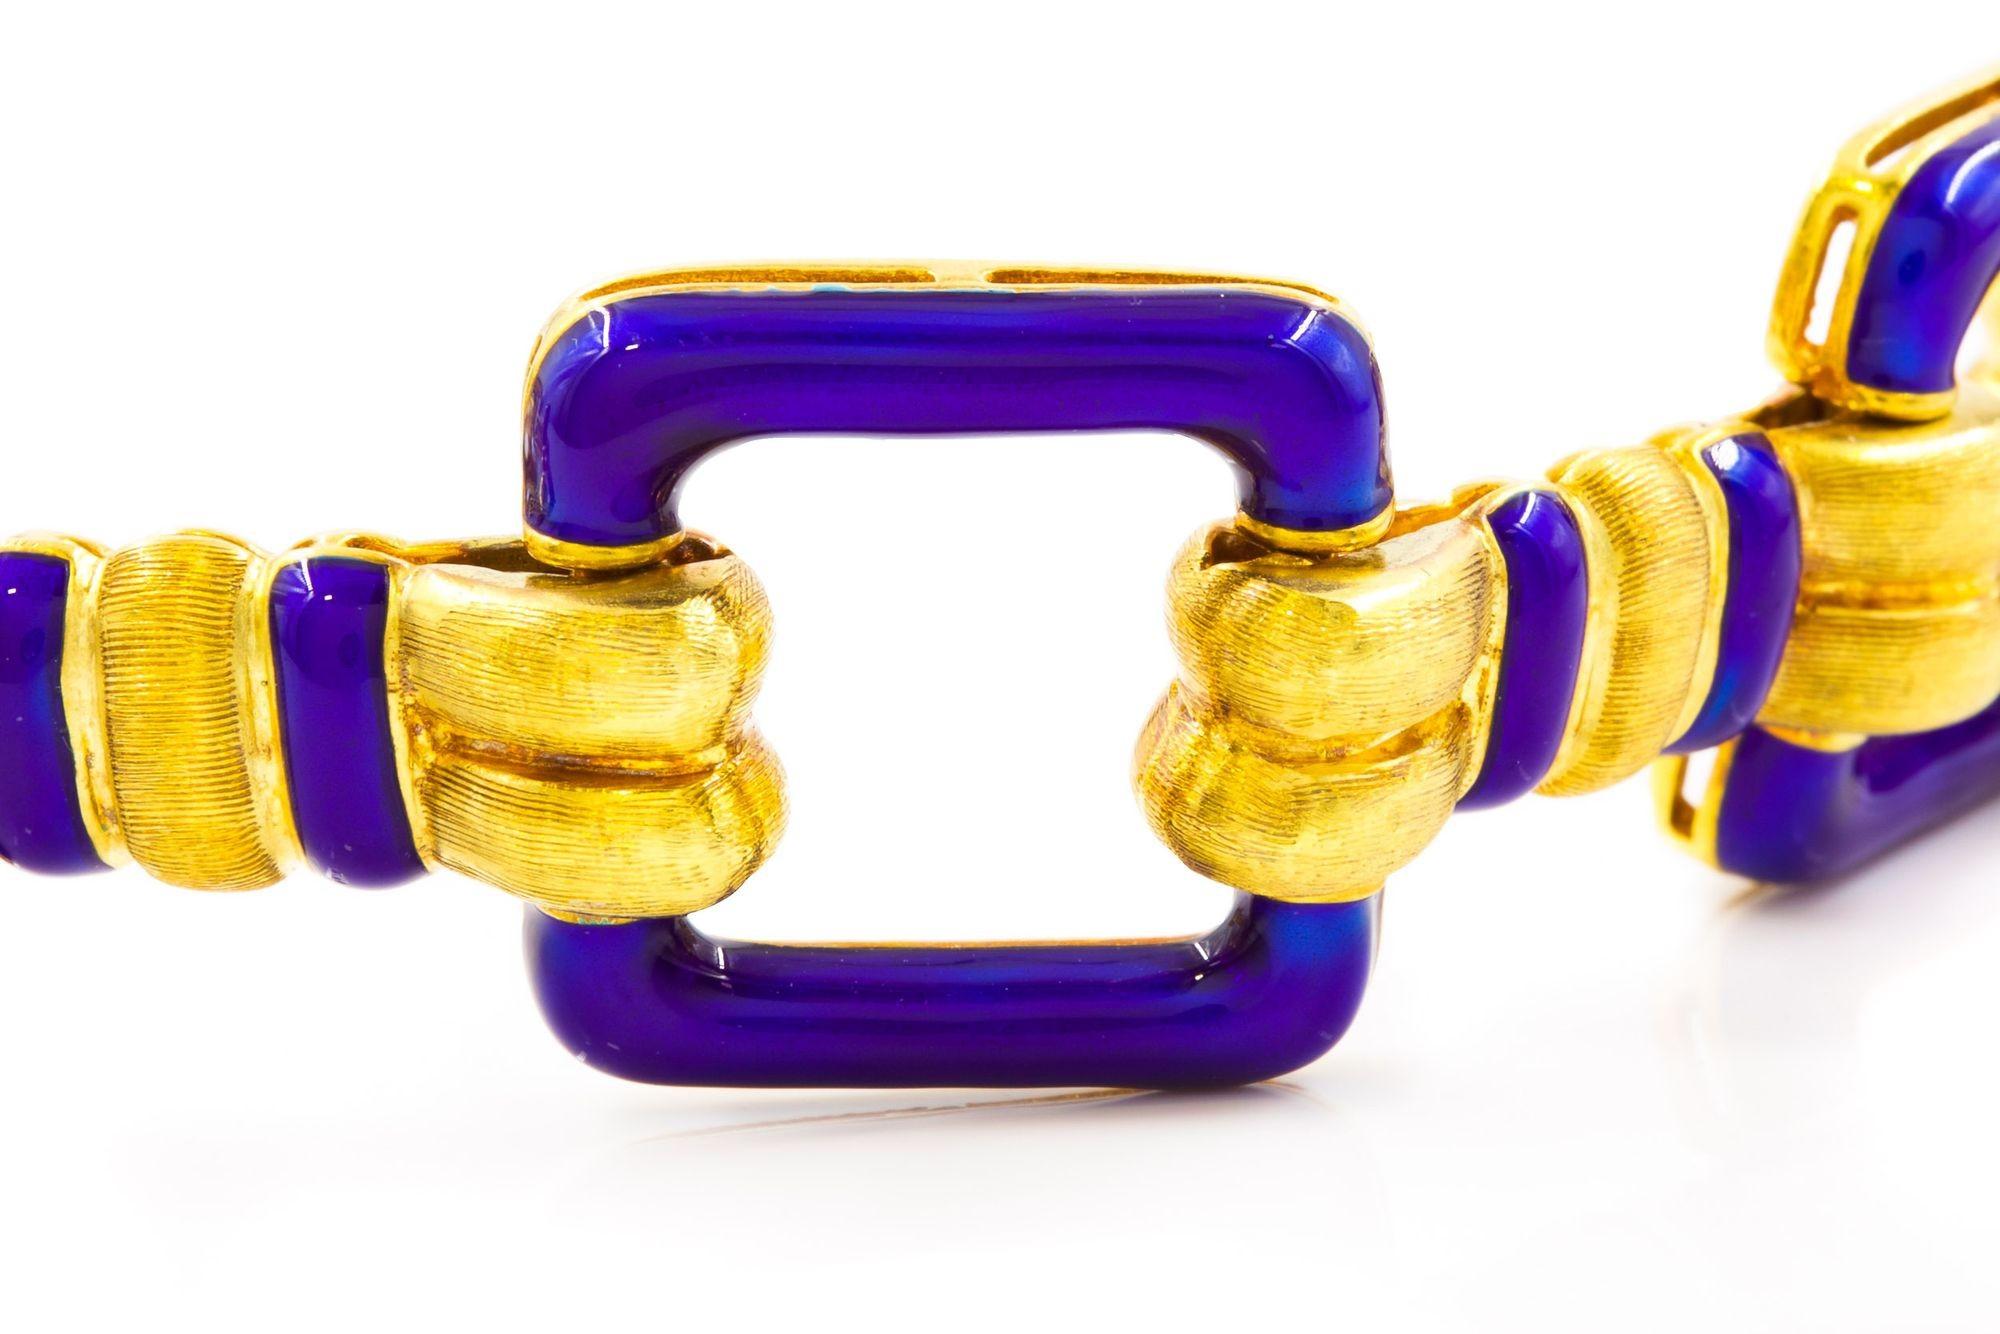 French Vintage Italian 18k Yellow Gold and Cobalt Blue Enamel Bracelet by Uno-A-Erre For Sale